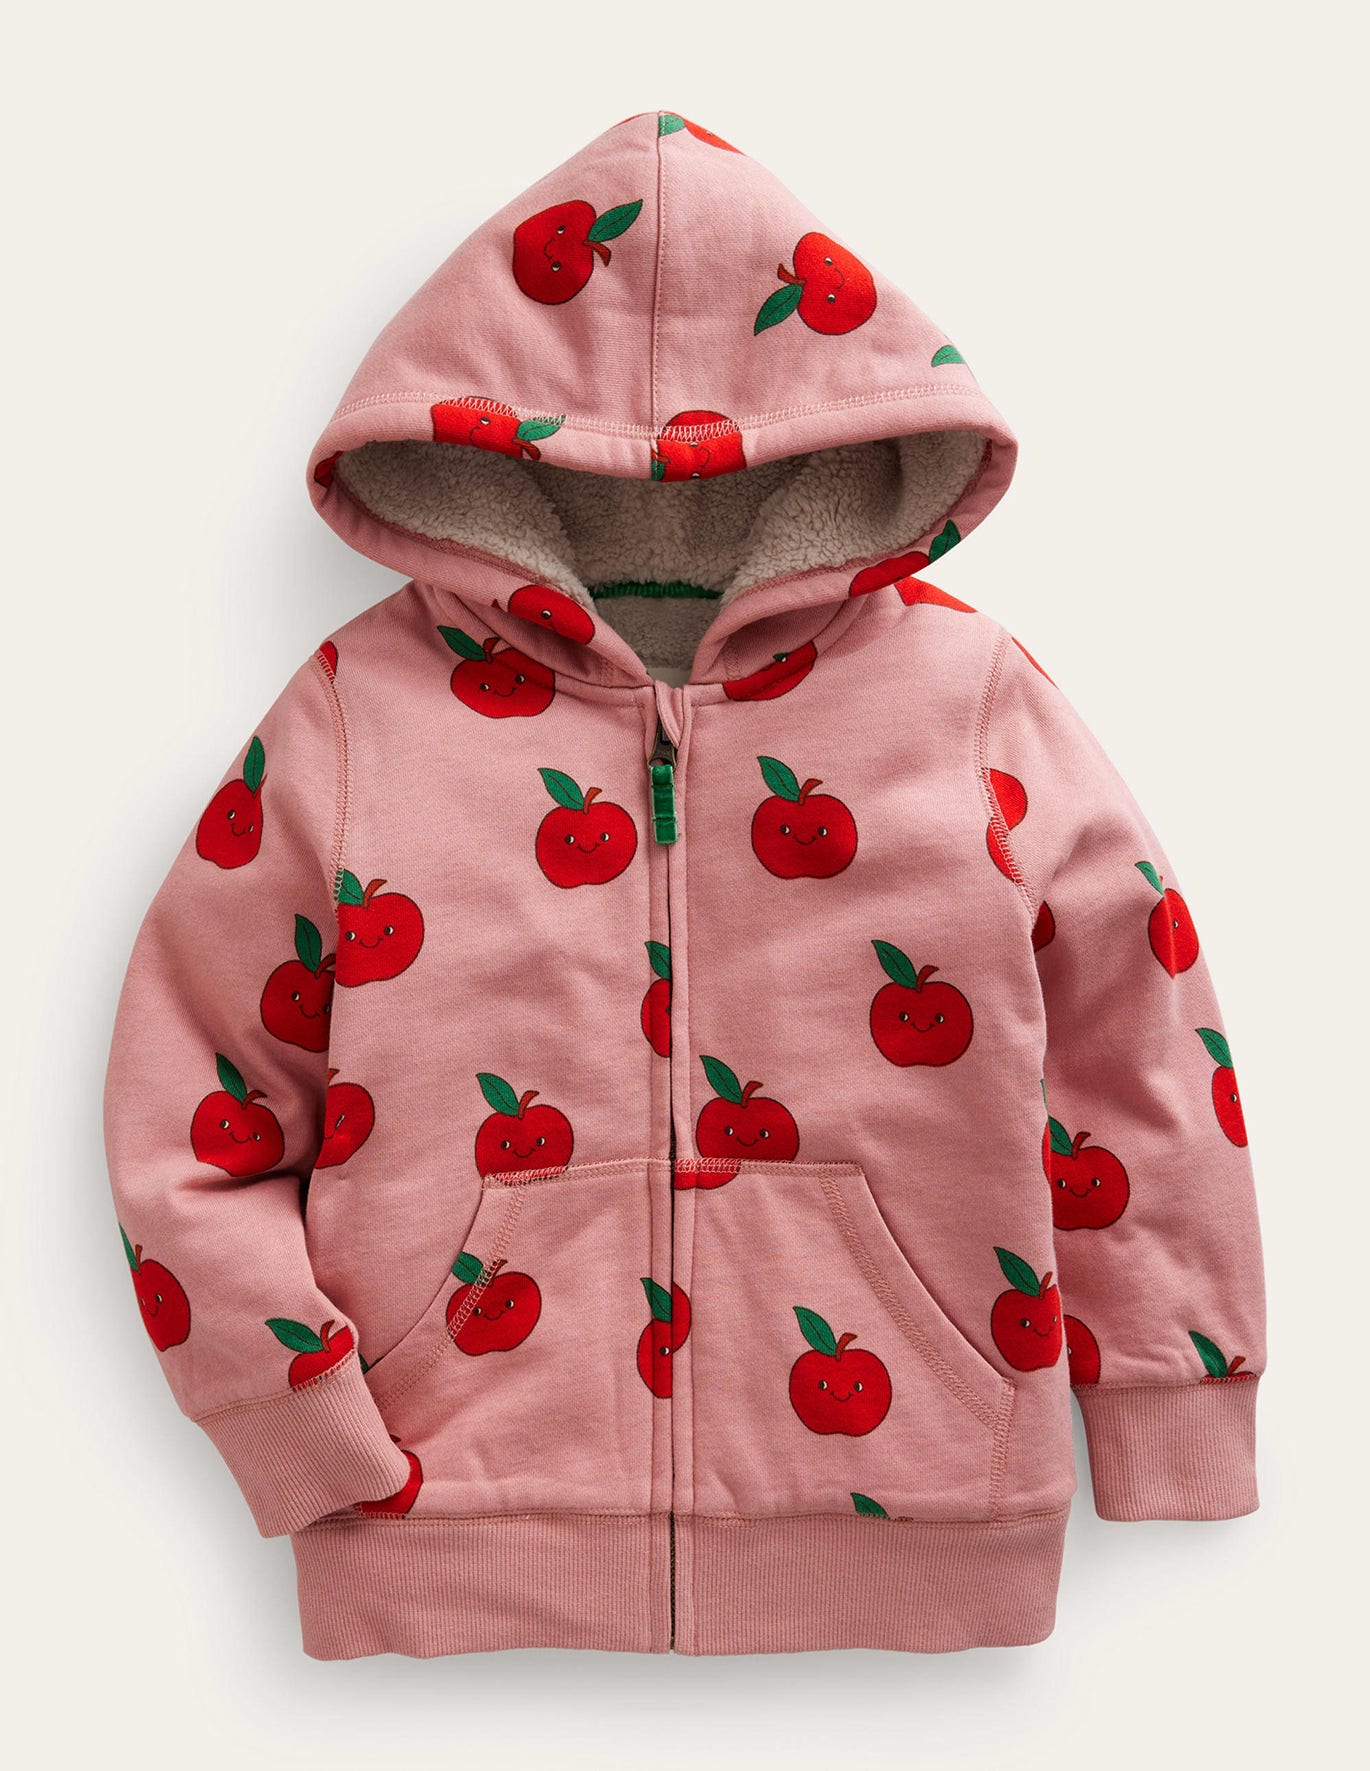 Boden Shaggy-lined Hoodie - French Pink Apples